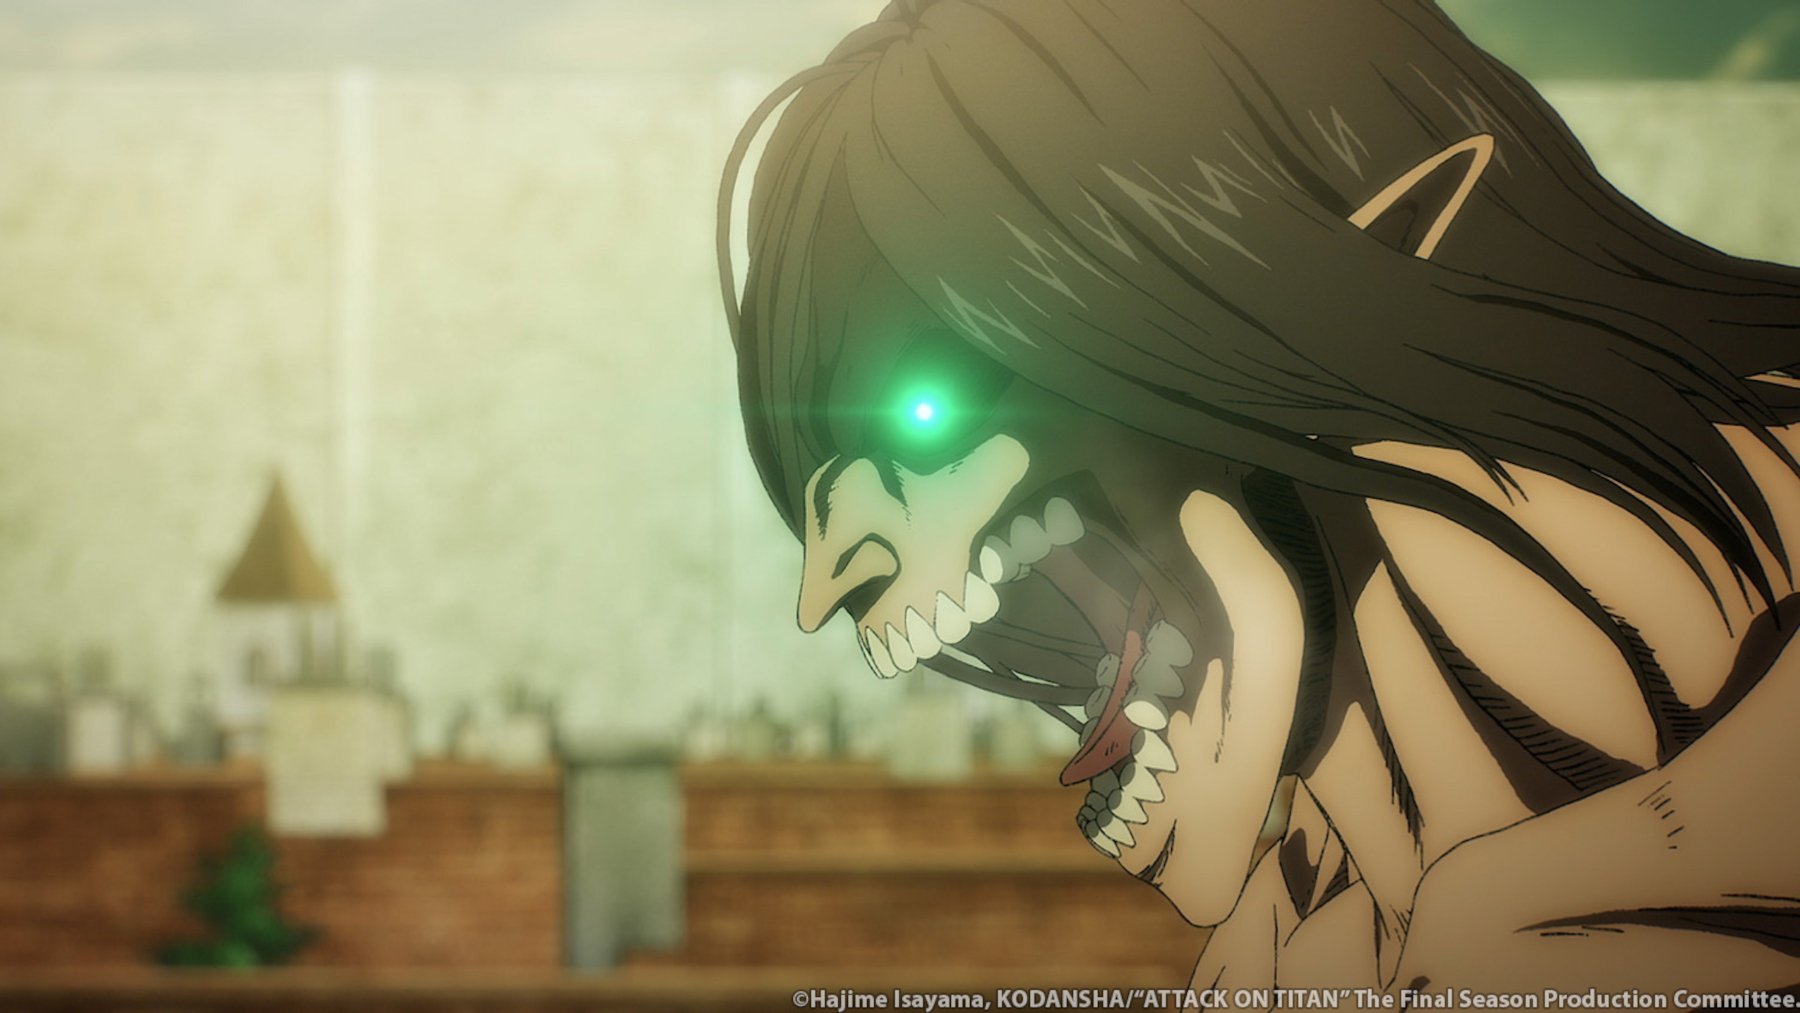 A still from 'Attack on Titan' season 4 part 2 for our list of best anime of 2022. It shows the side view of Eren Yeager's Titan.  His eyes glow green, and his mouth is open.